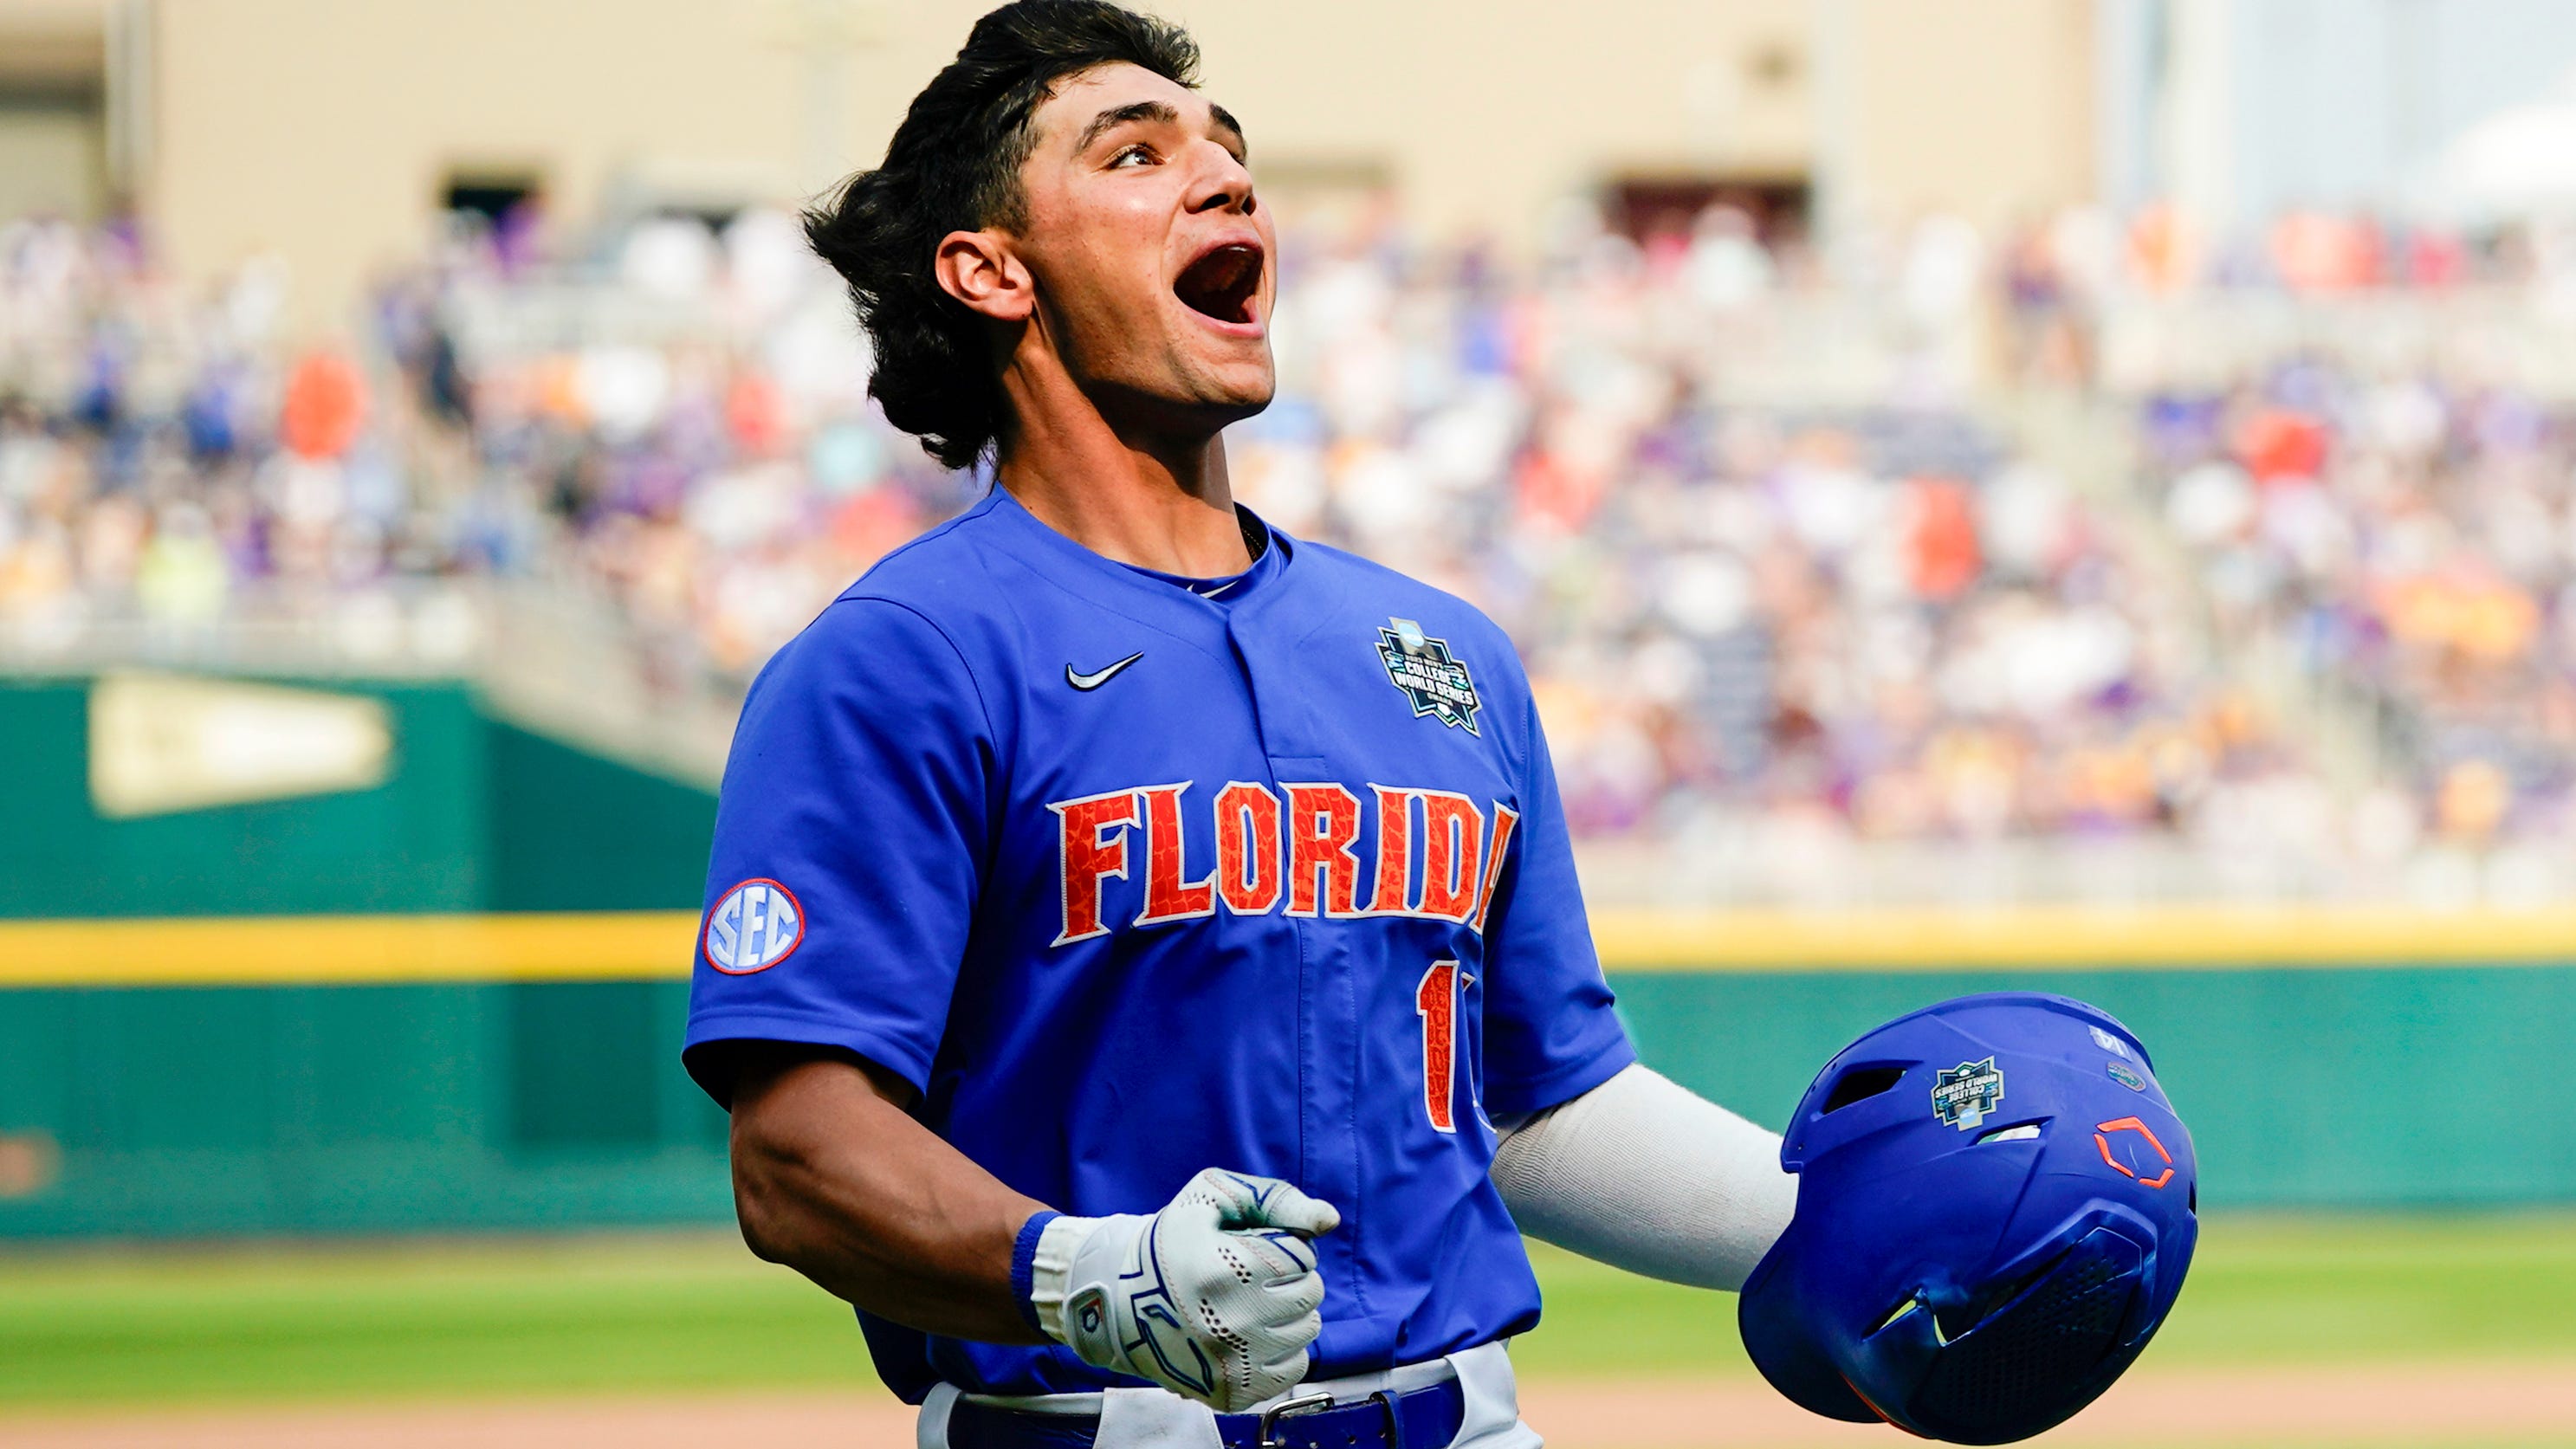 Florida baseball blasts 7 homers in mid-week win over Stetson